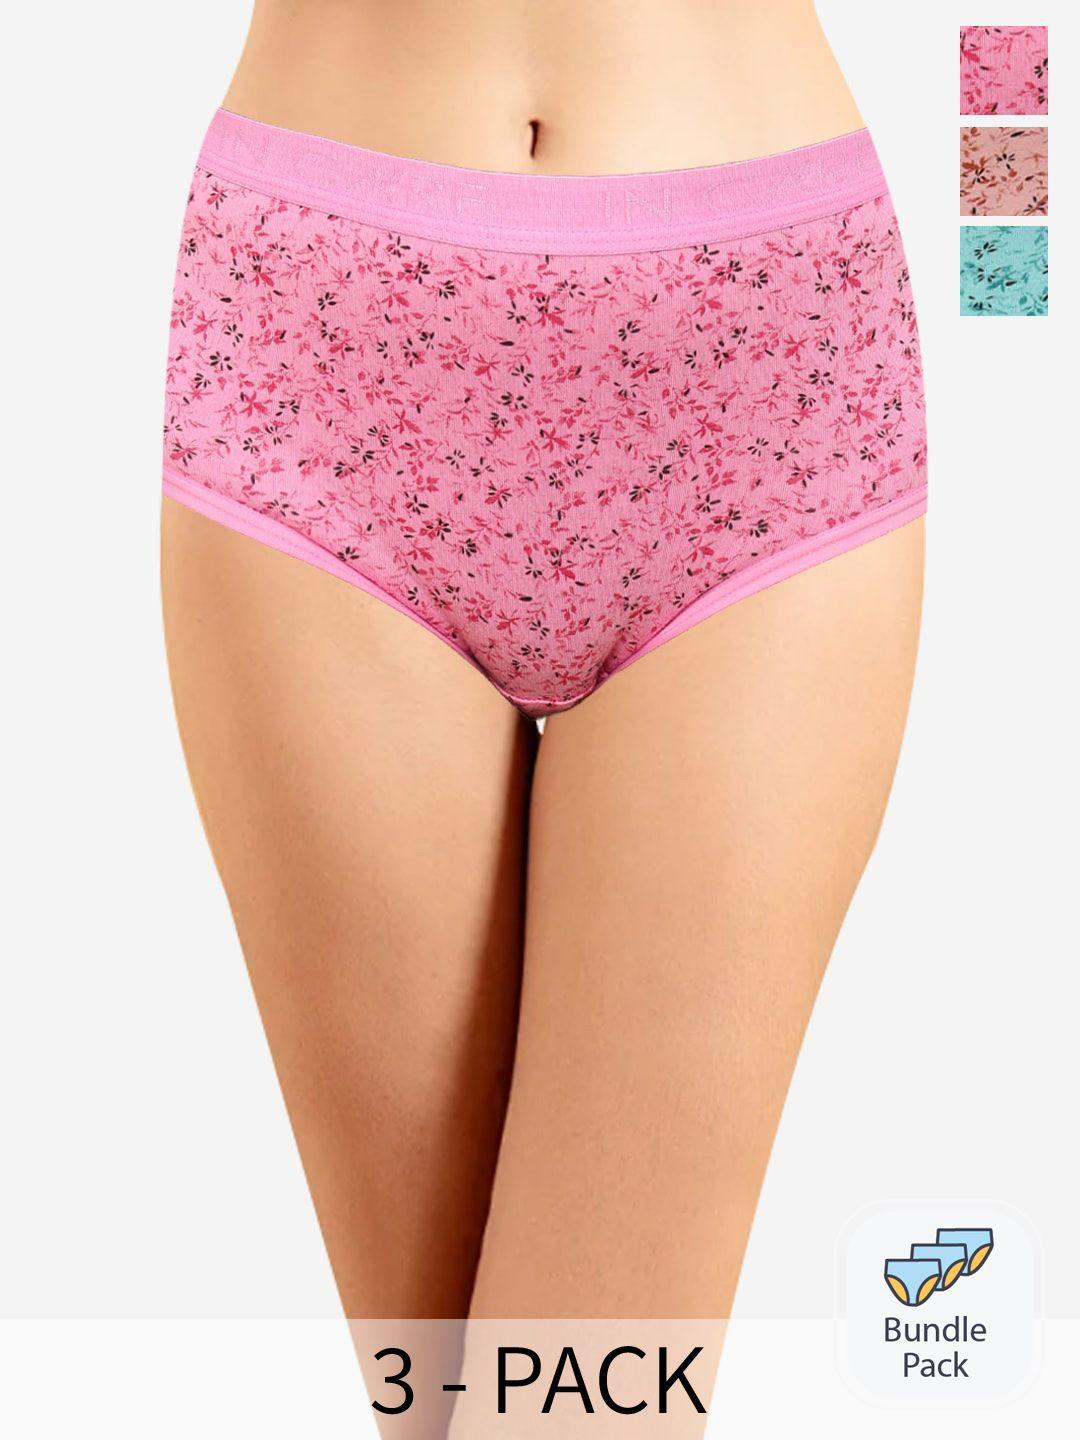 in-care-pack-of-3-floral-printed-mid-rise-cotton-hipster-briefs-icoe-059_m